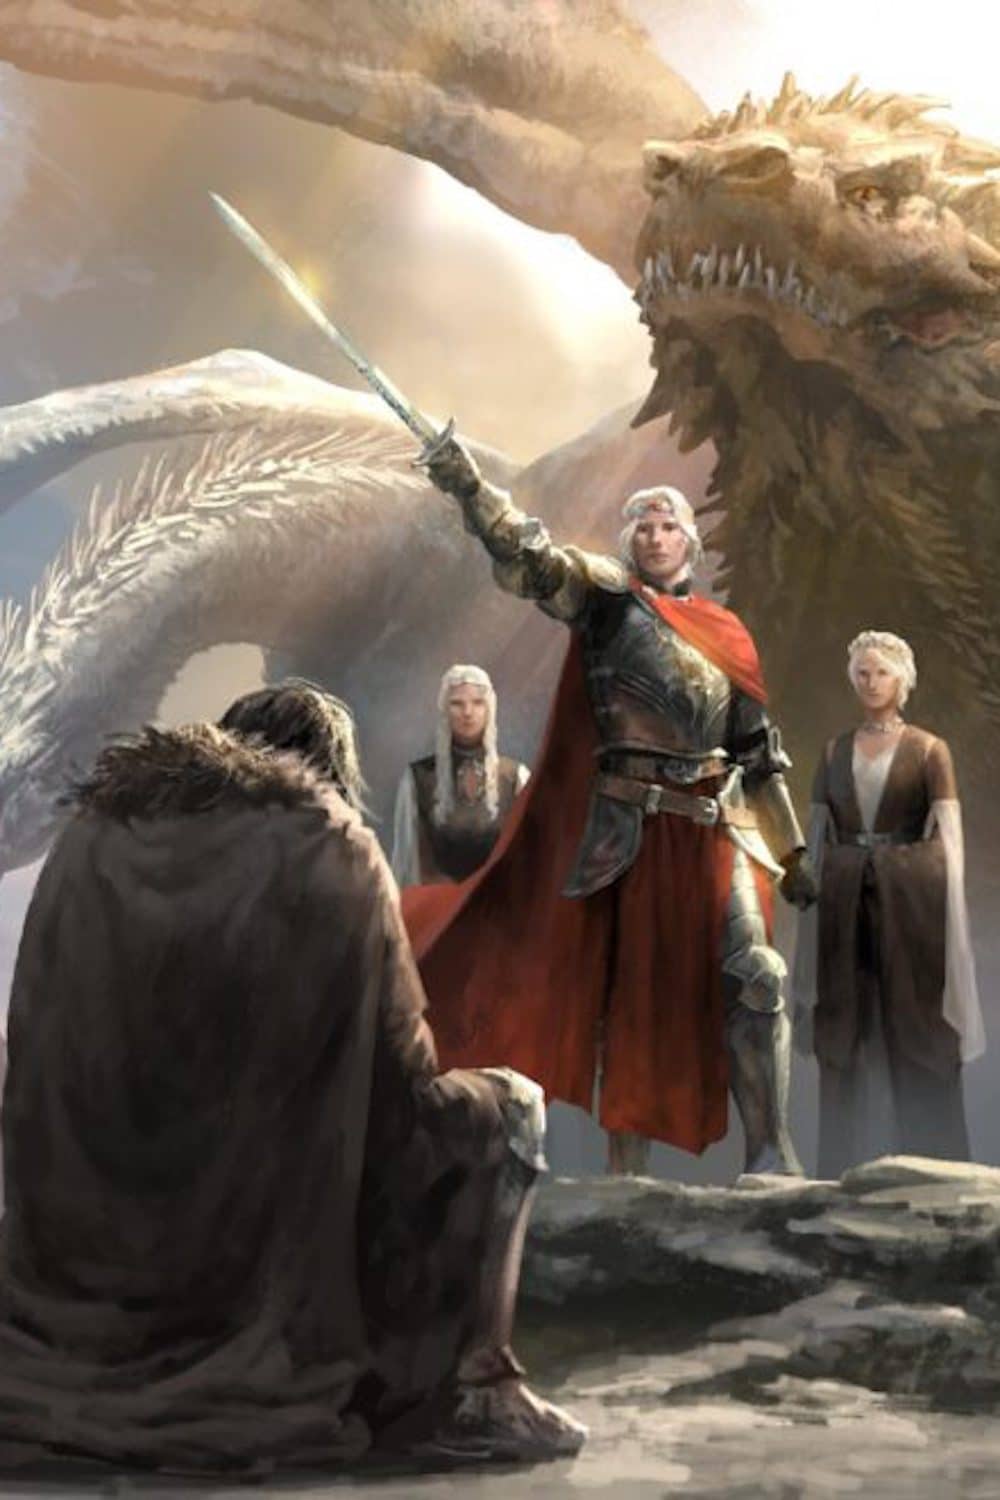 The Rise of the Dragon George R.R. Martin Illustration